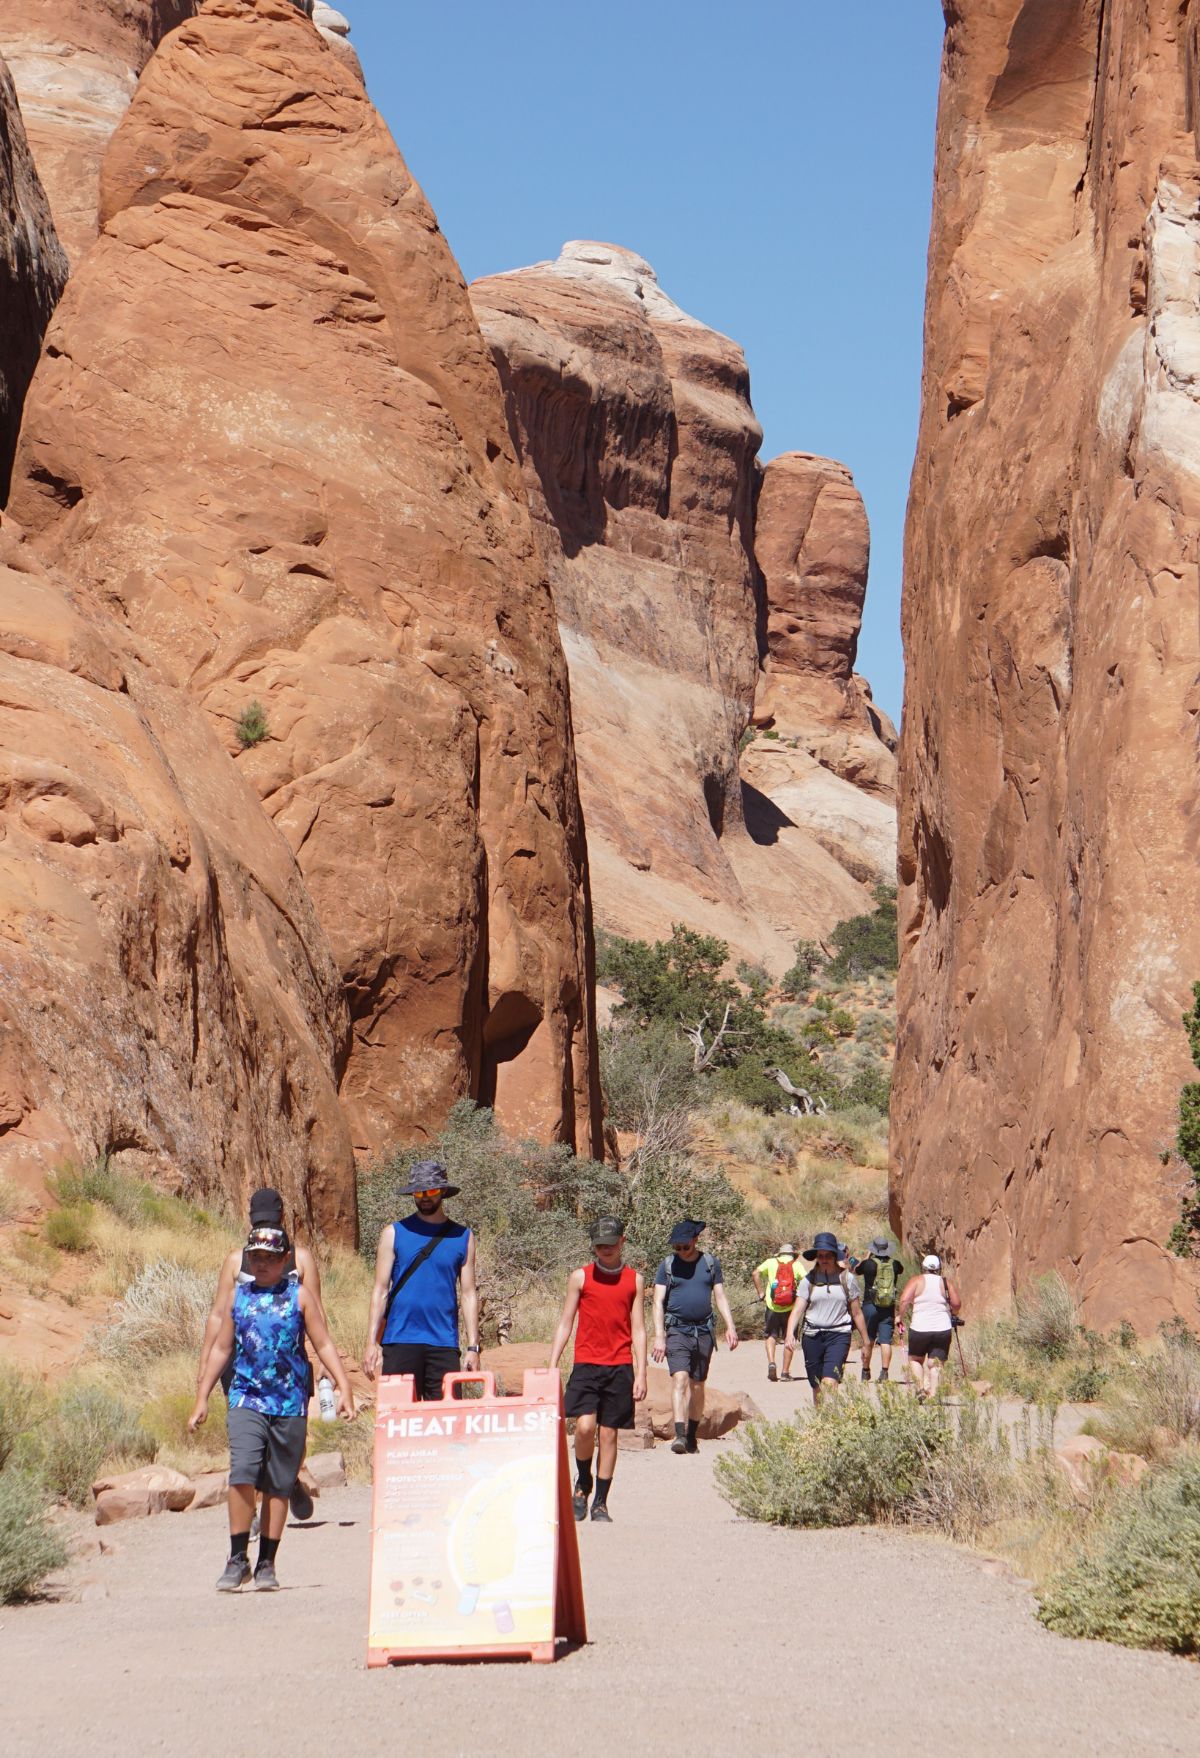 A group of people walking in Devils garden Arches national park, utah.